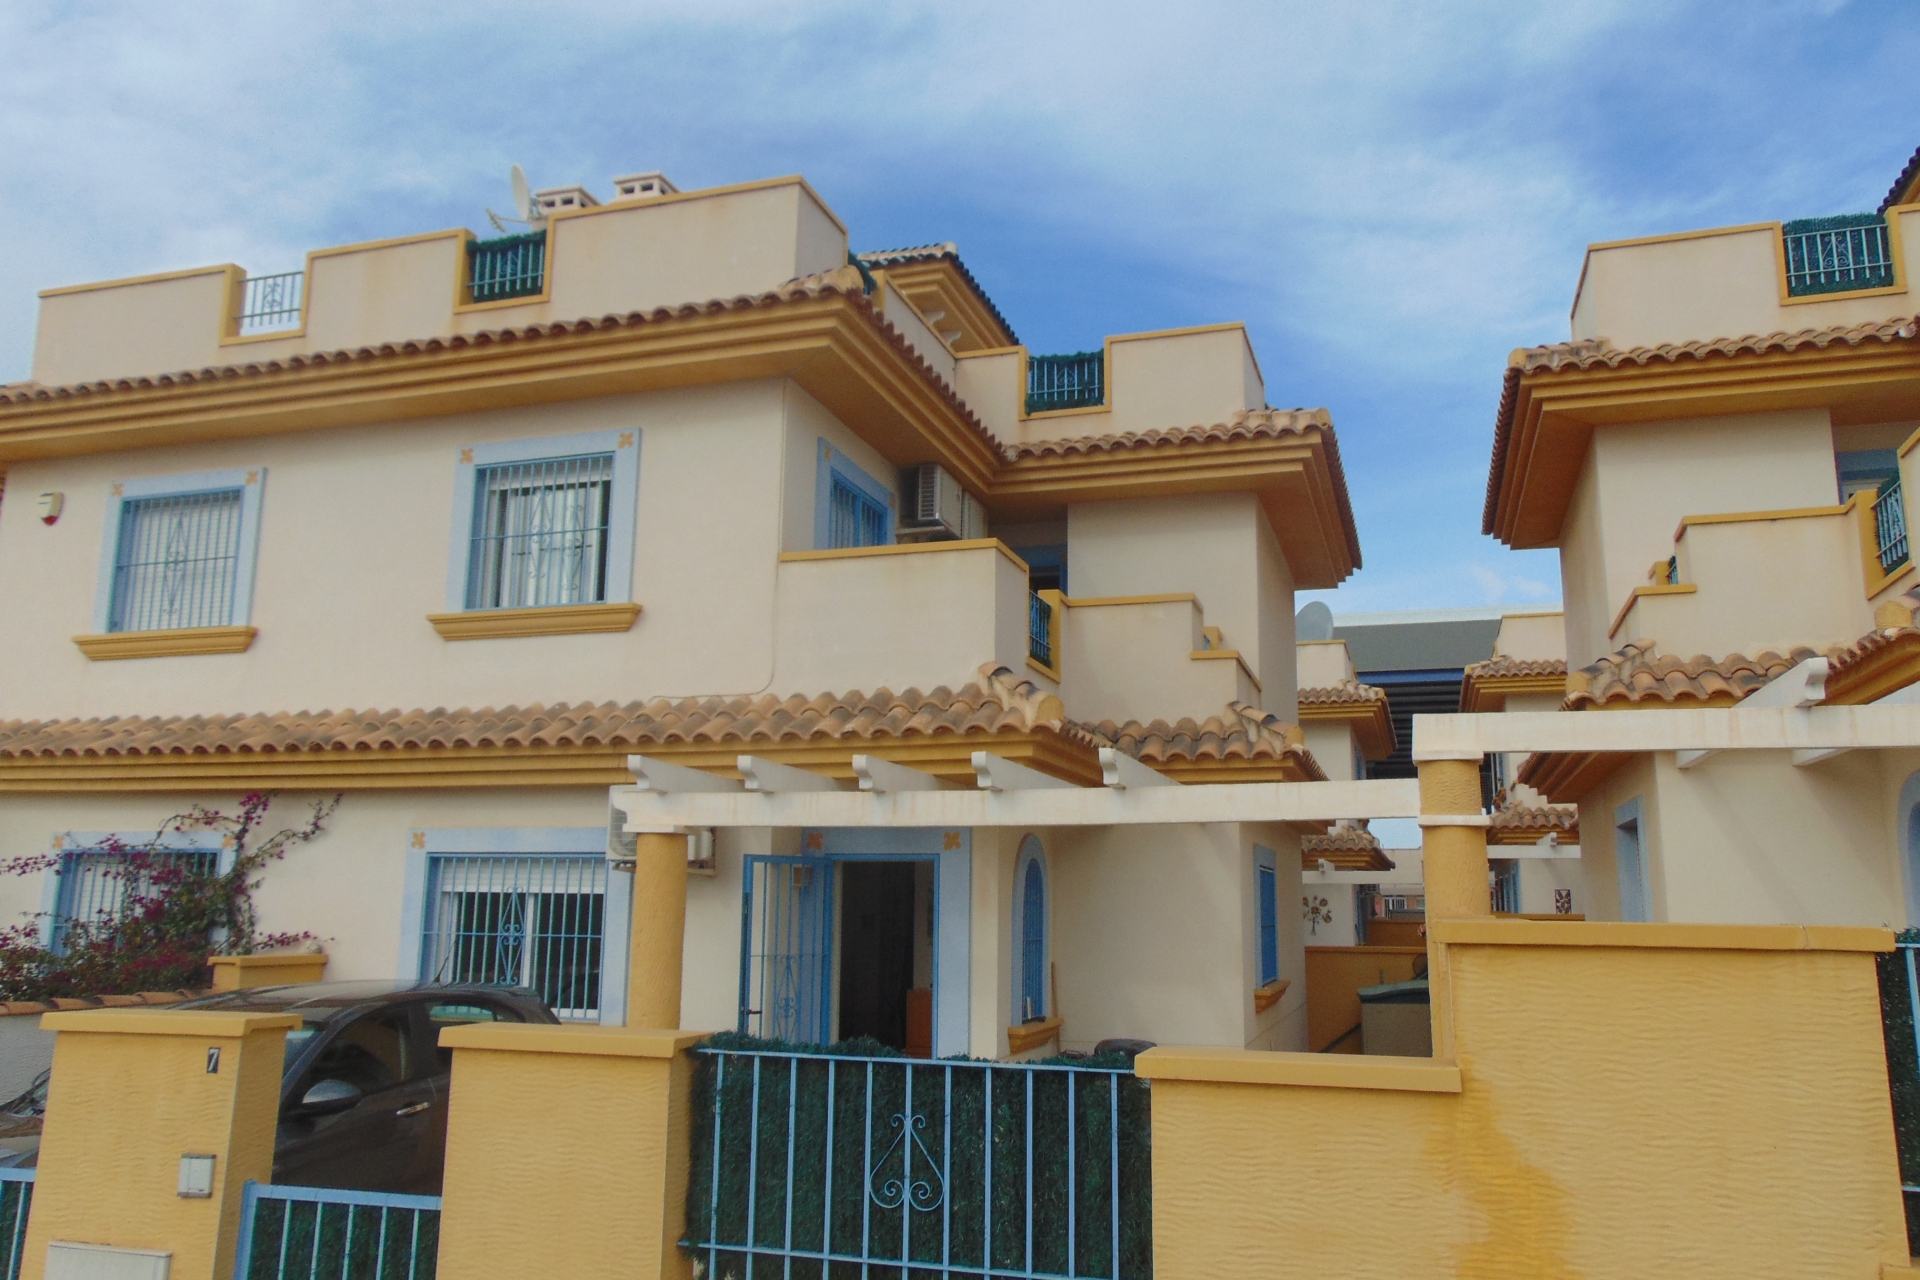 Archived - Townhouse for sale - Sucina - La Tercia